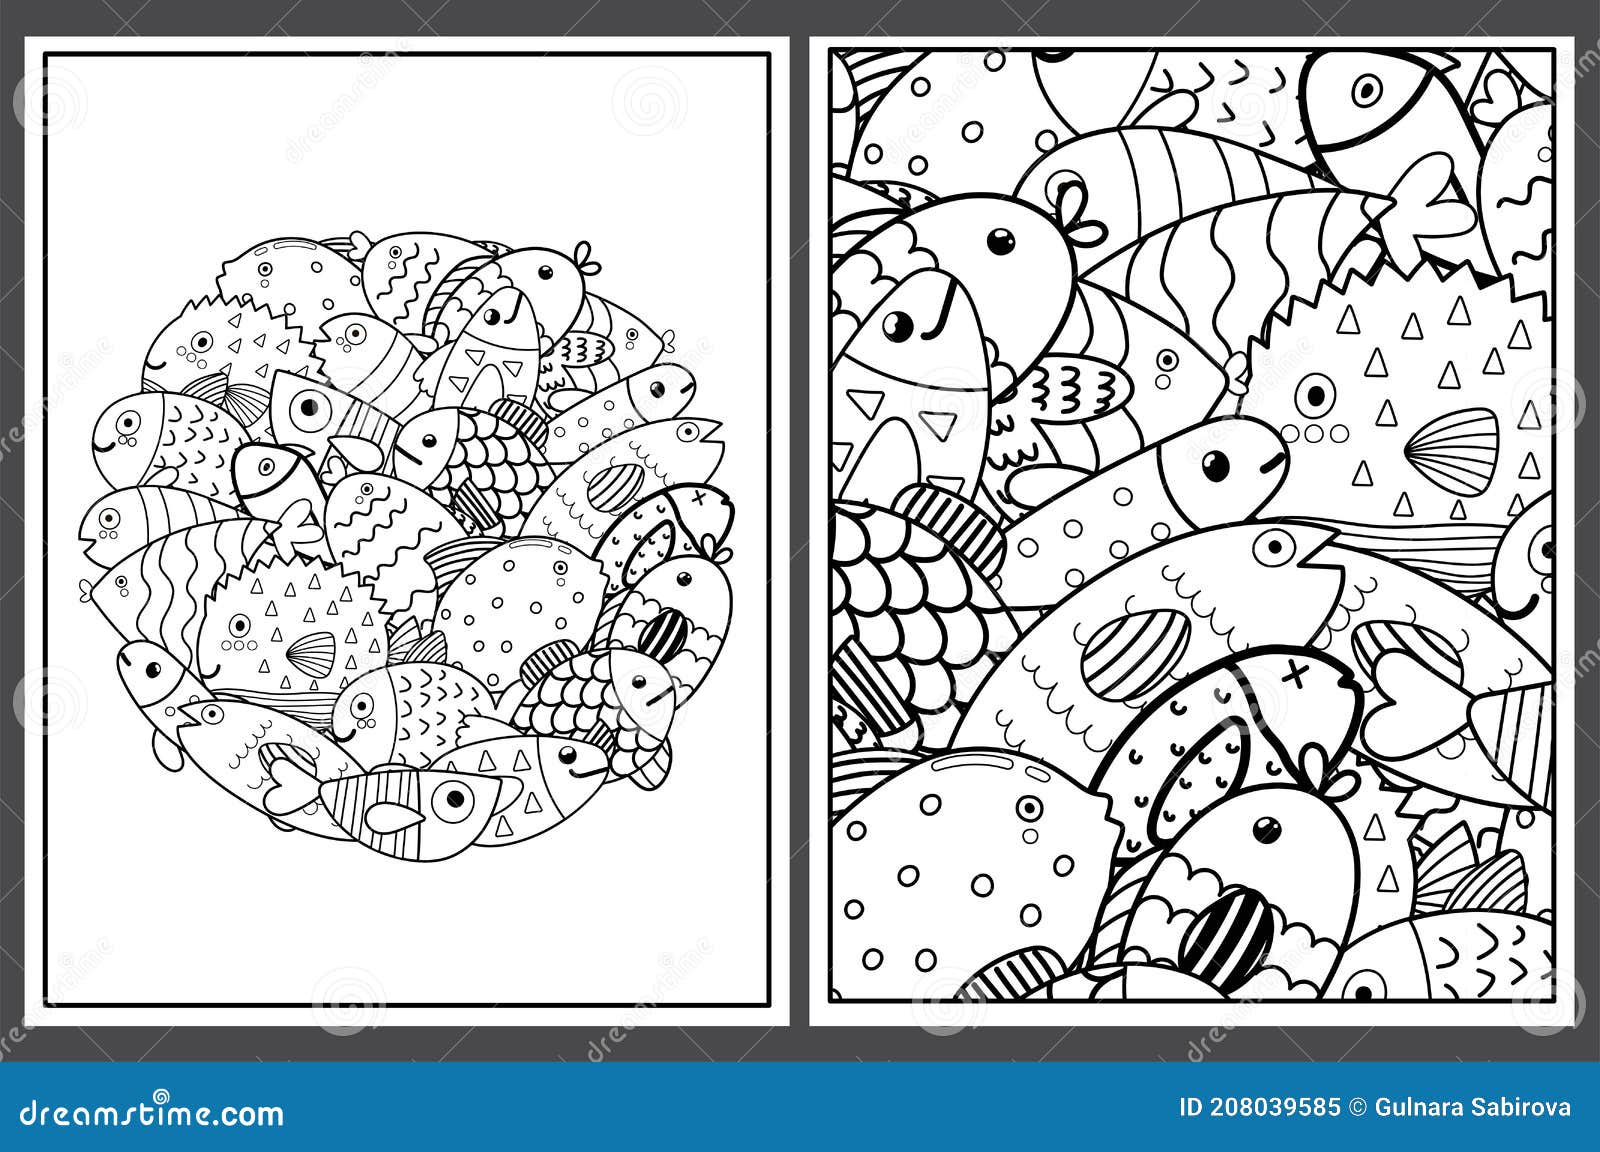 Colouring pages kids stock illustrations â colouring pages kids stock illustrations vectors clipart